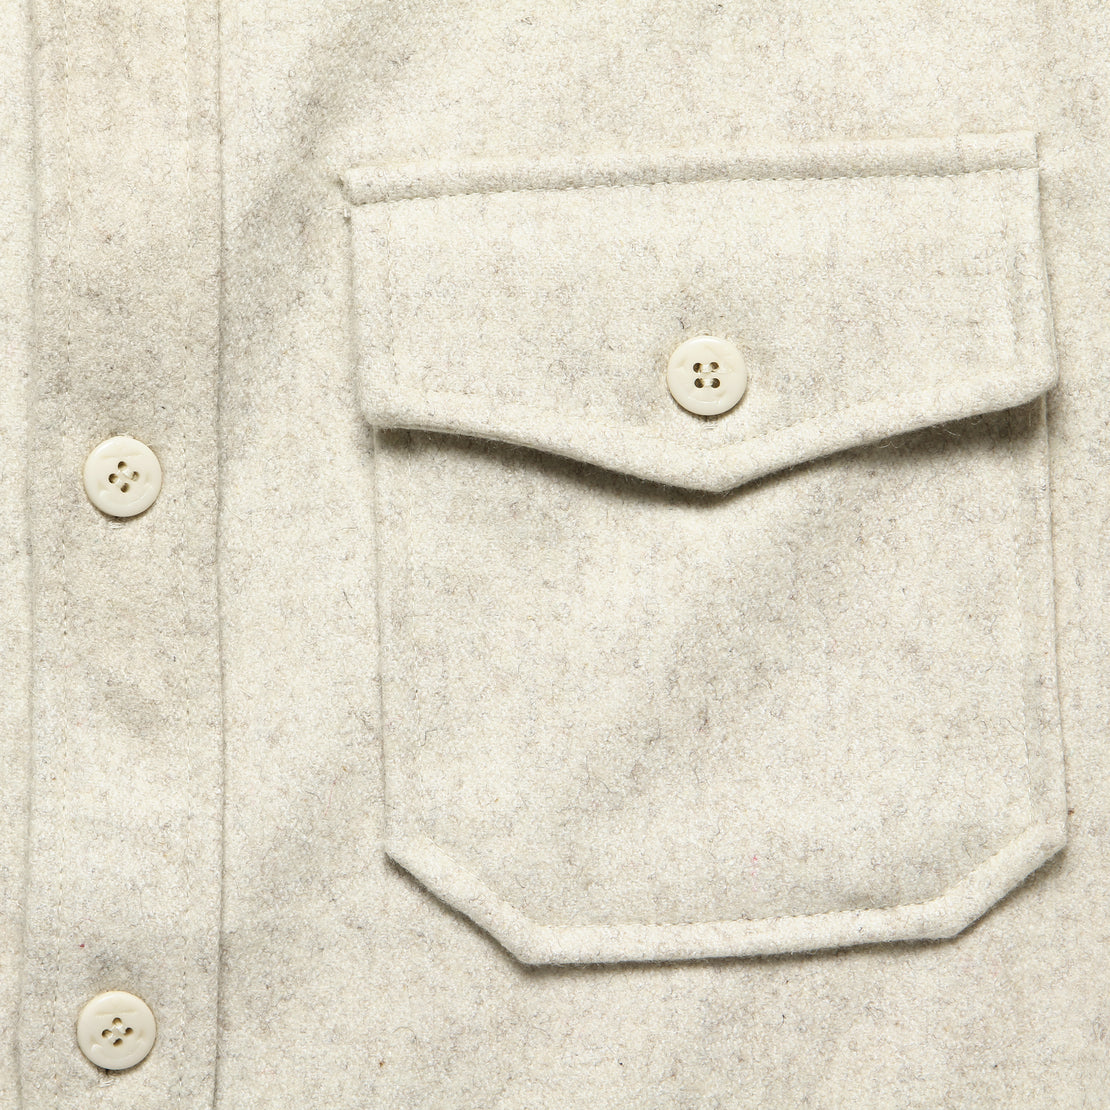 CPO Wool Shirt - Oatmeal - Schott - STAG Provisions - Tops - L/S Woven - Overshirt